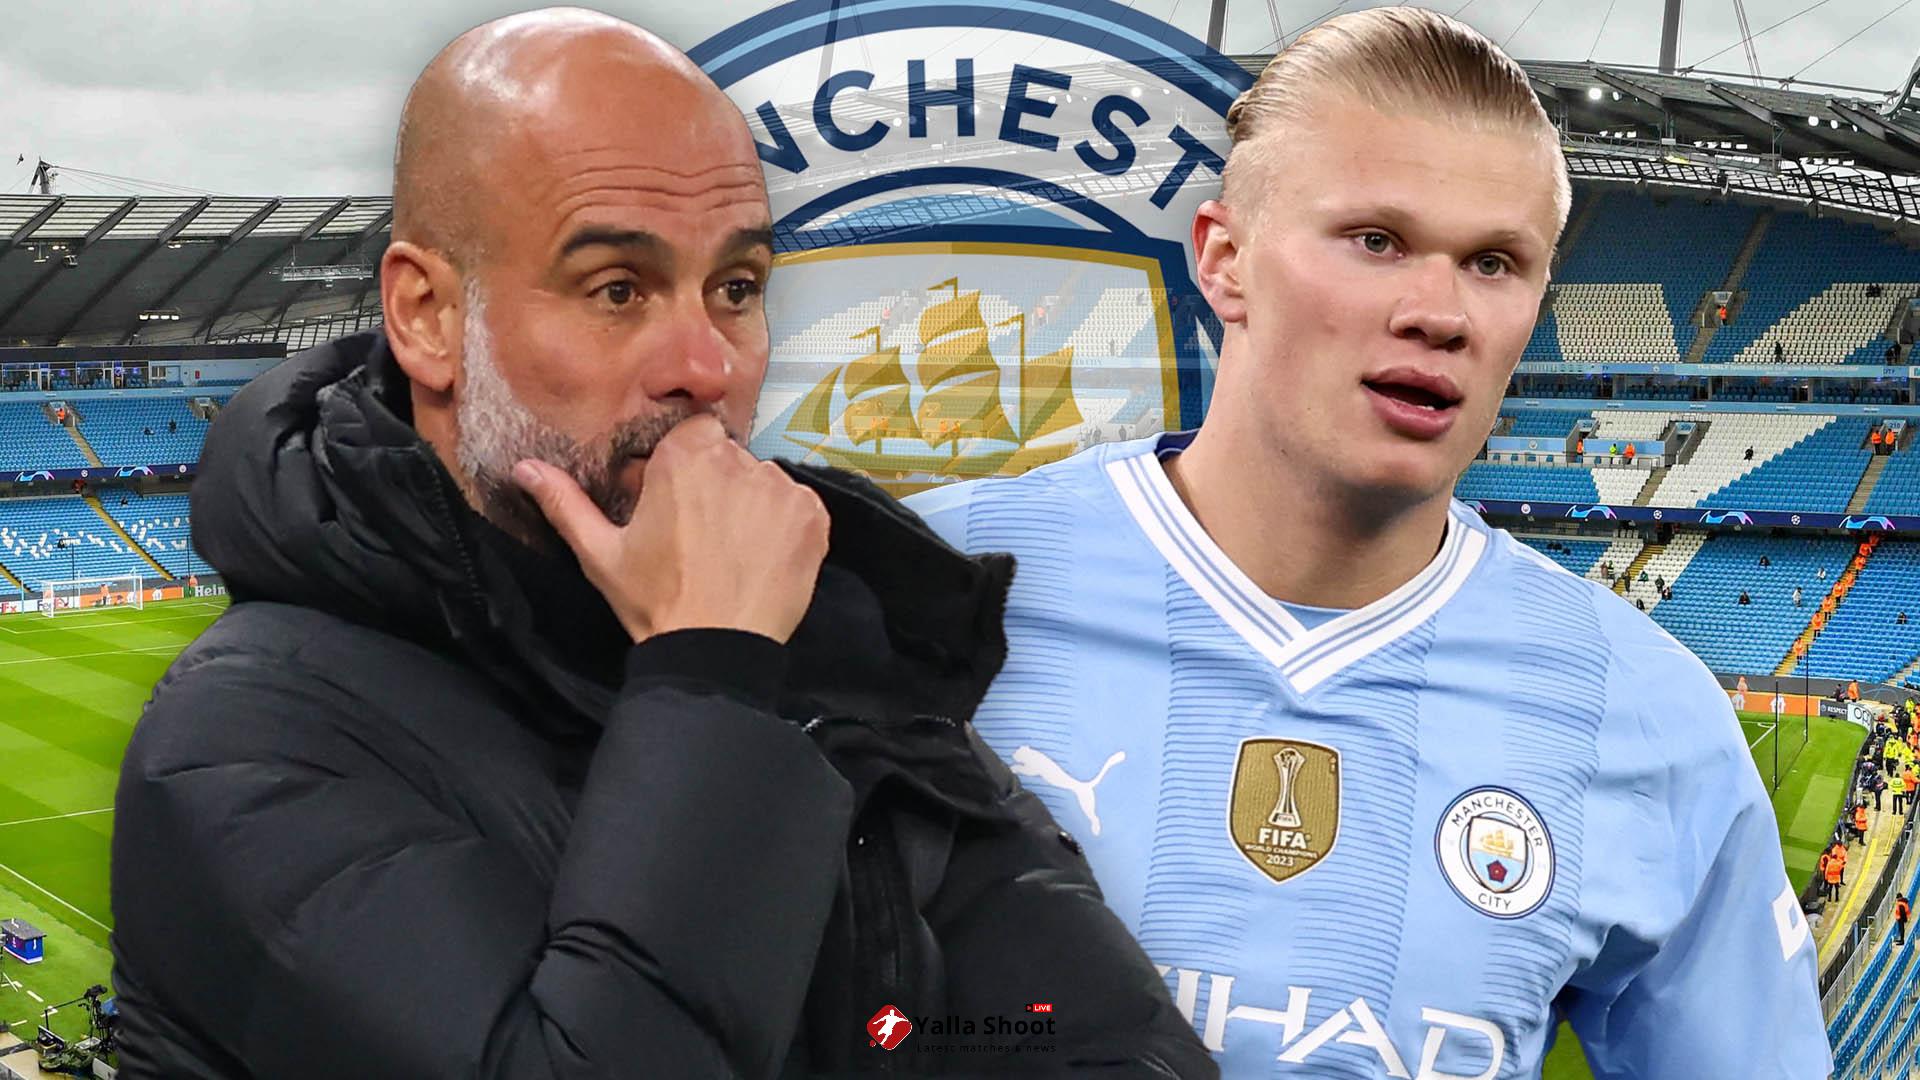 Man City make transfer decision on Erling Haaland with star striker yet to agree terms on new contract with champions